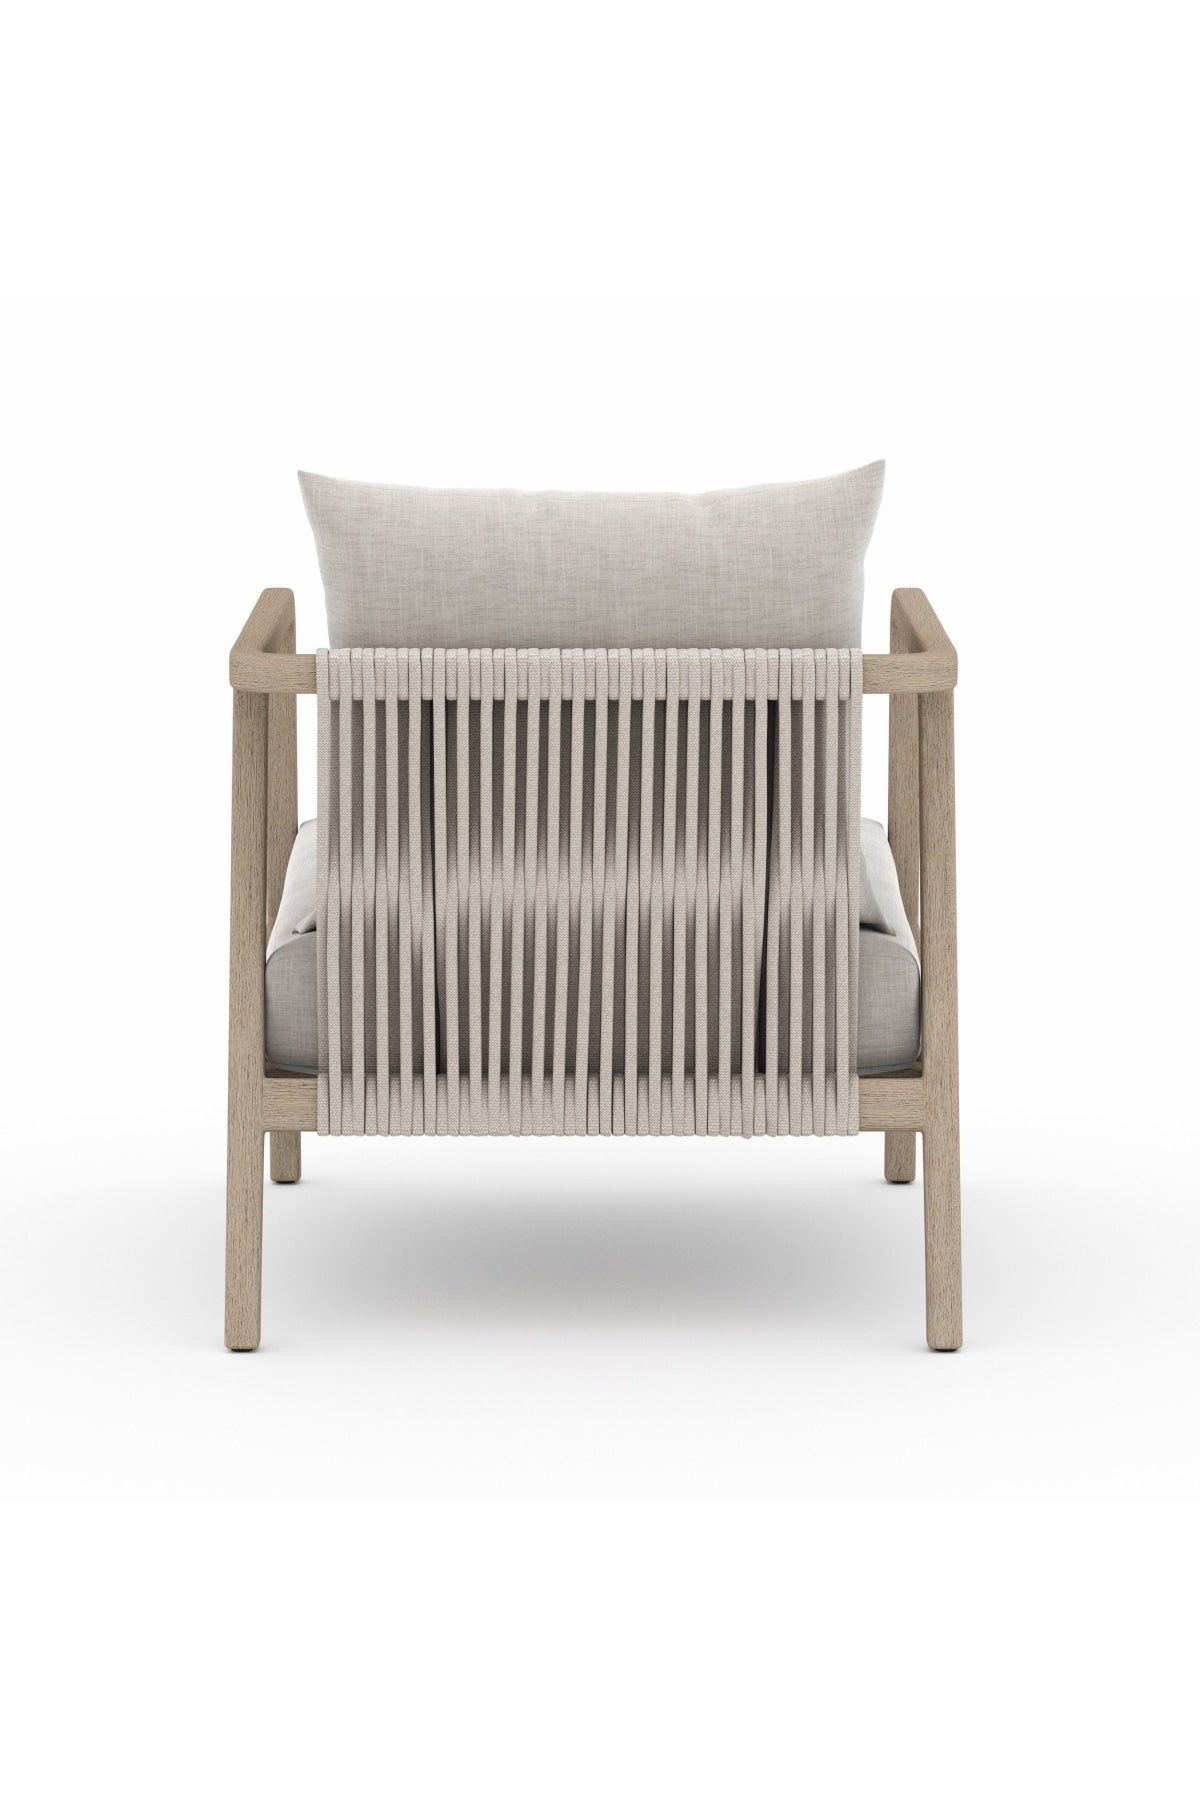 Noma Outdoor Chair